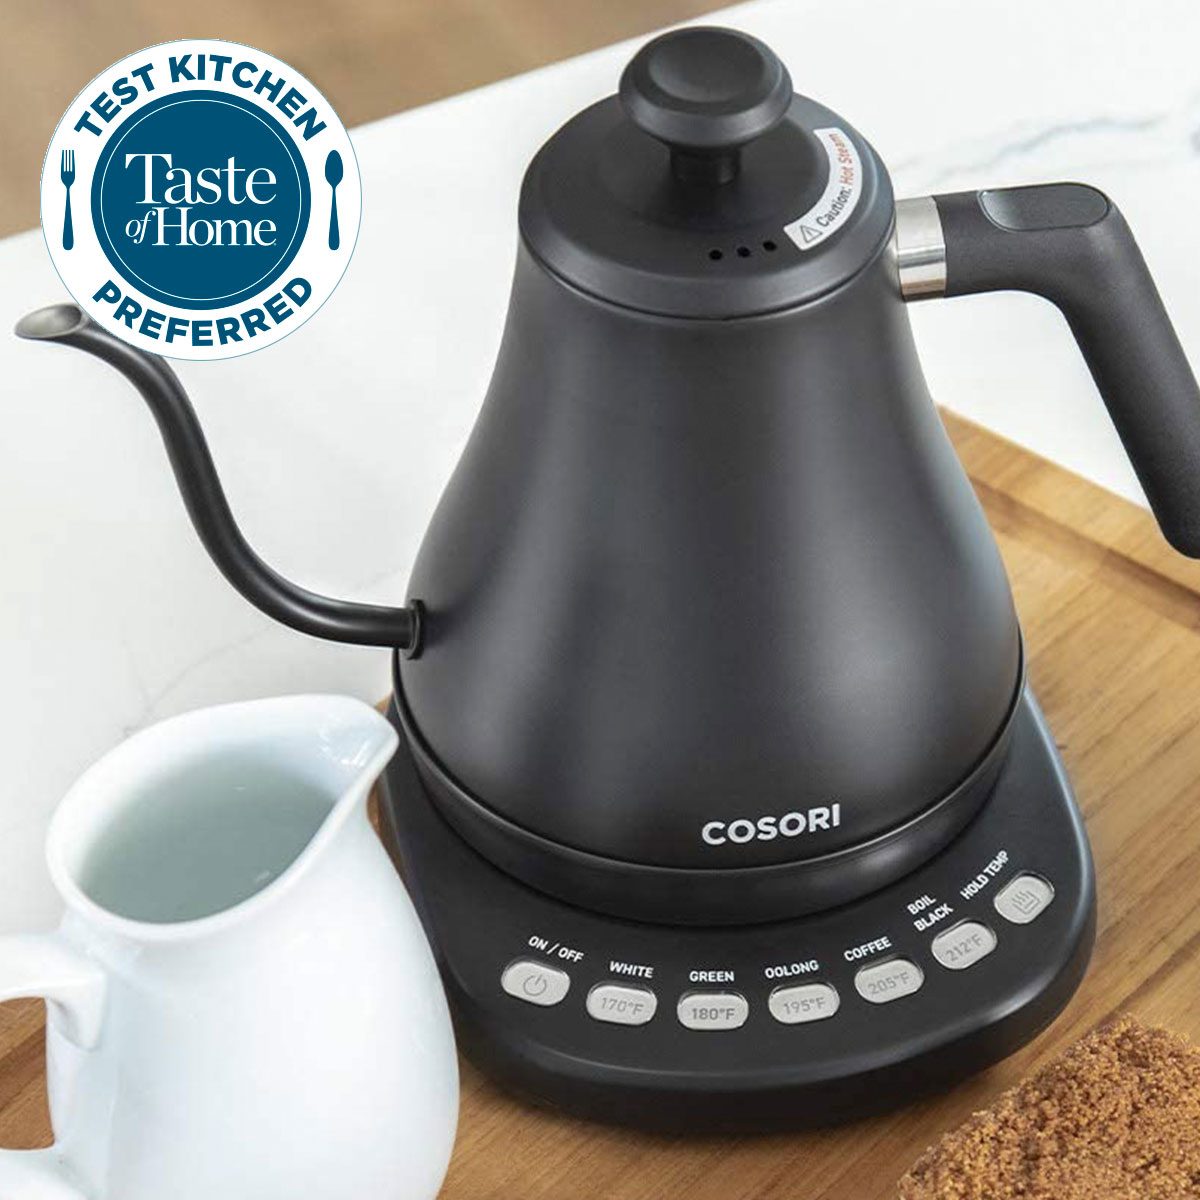 An Honest Review of Cosori's Electric Gooseneck Kettle